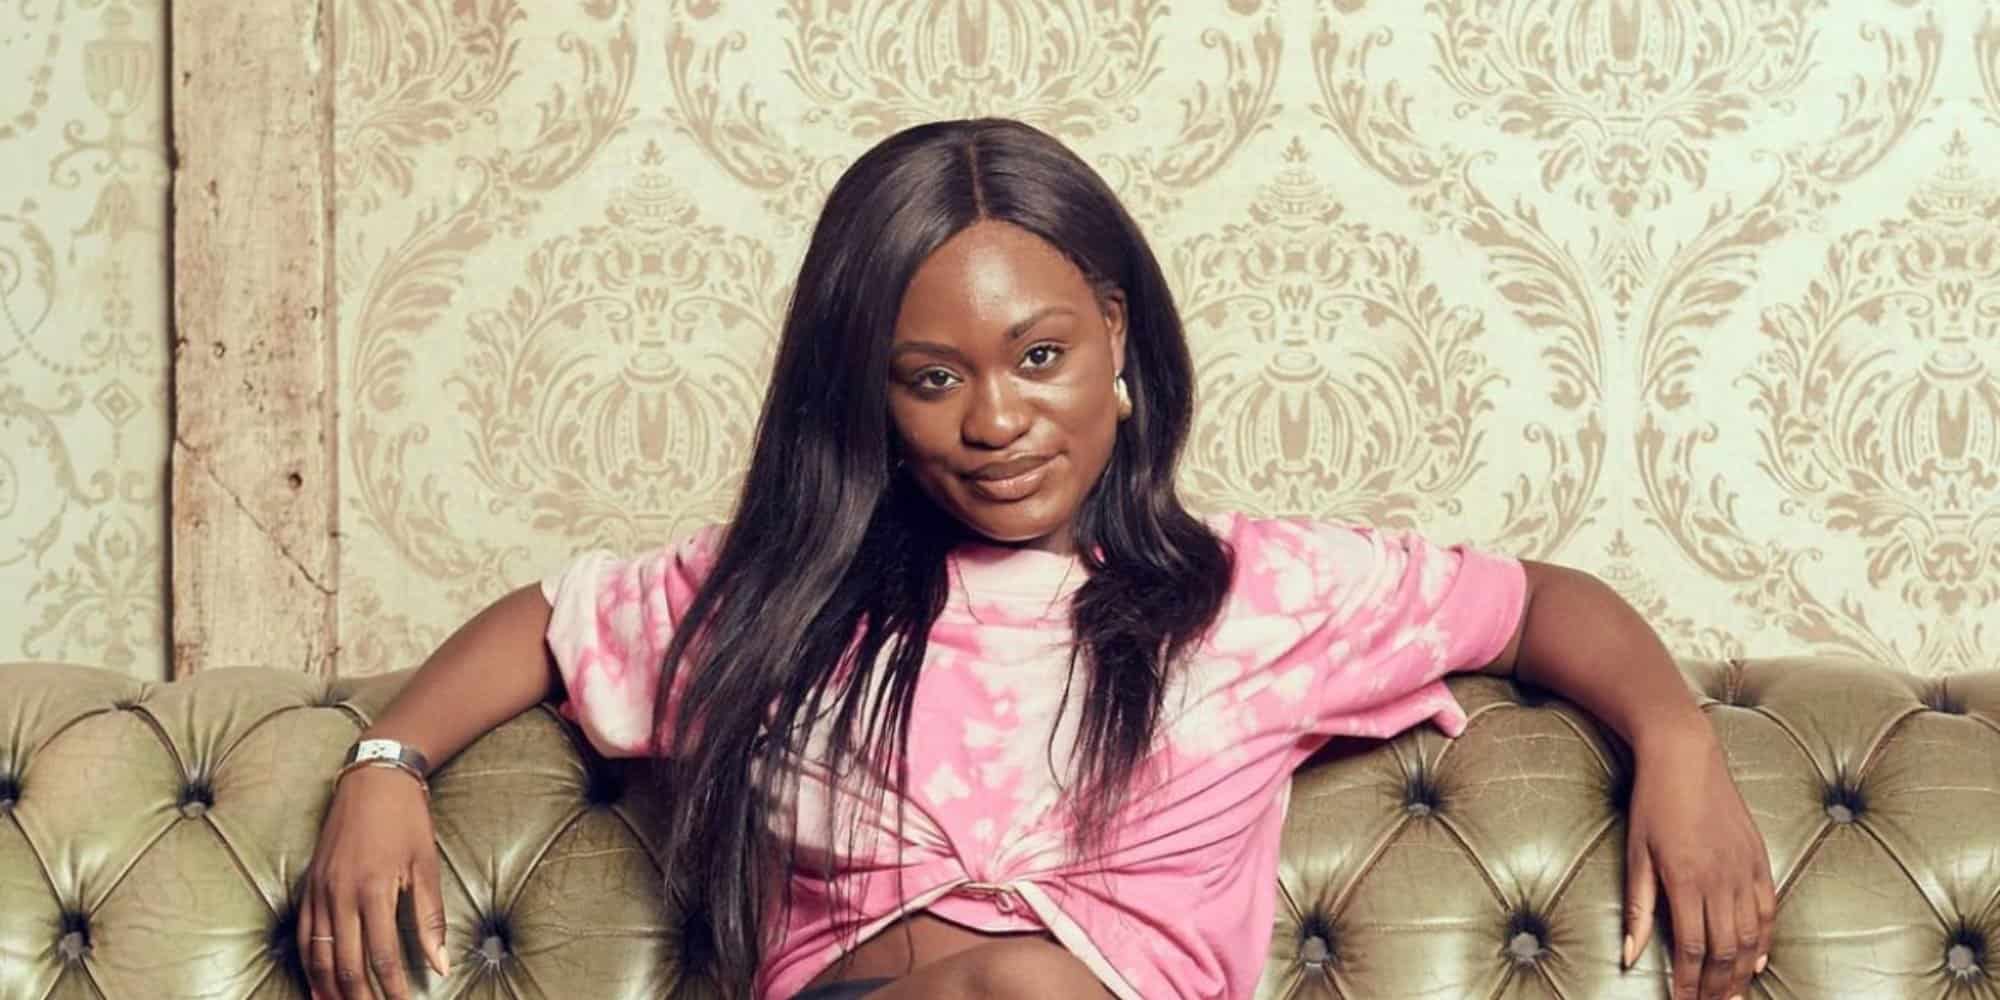 Bolu Babalola, Cuppy, Kiddwaya and other Black entertainers take over Channel 4